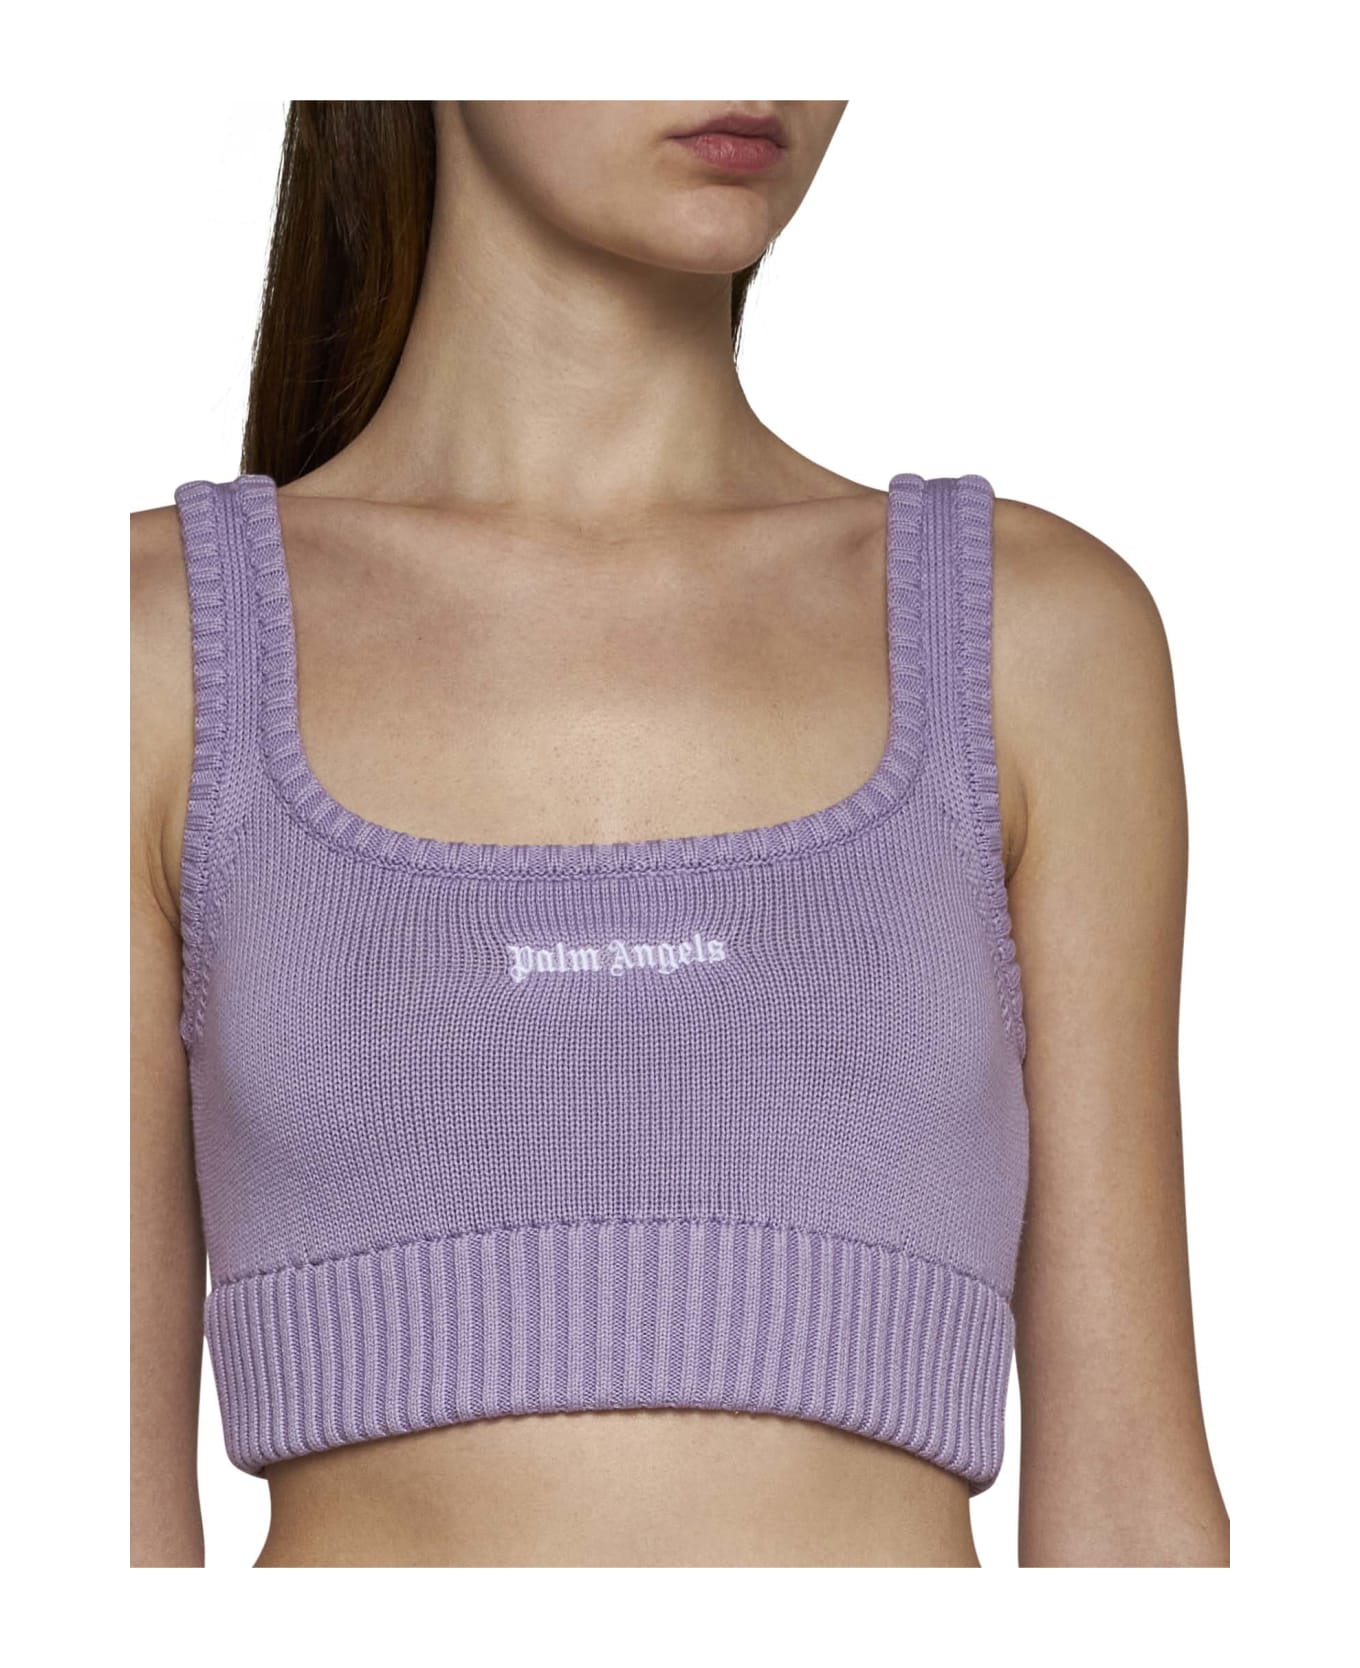 Palm Angels Logo Embroidered Knit Cropped Top - Lilac off white トップス